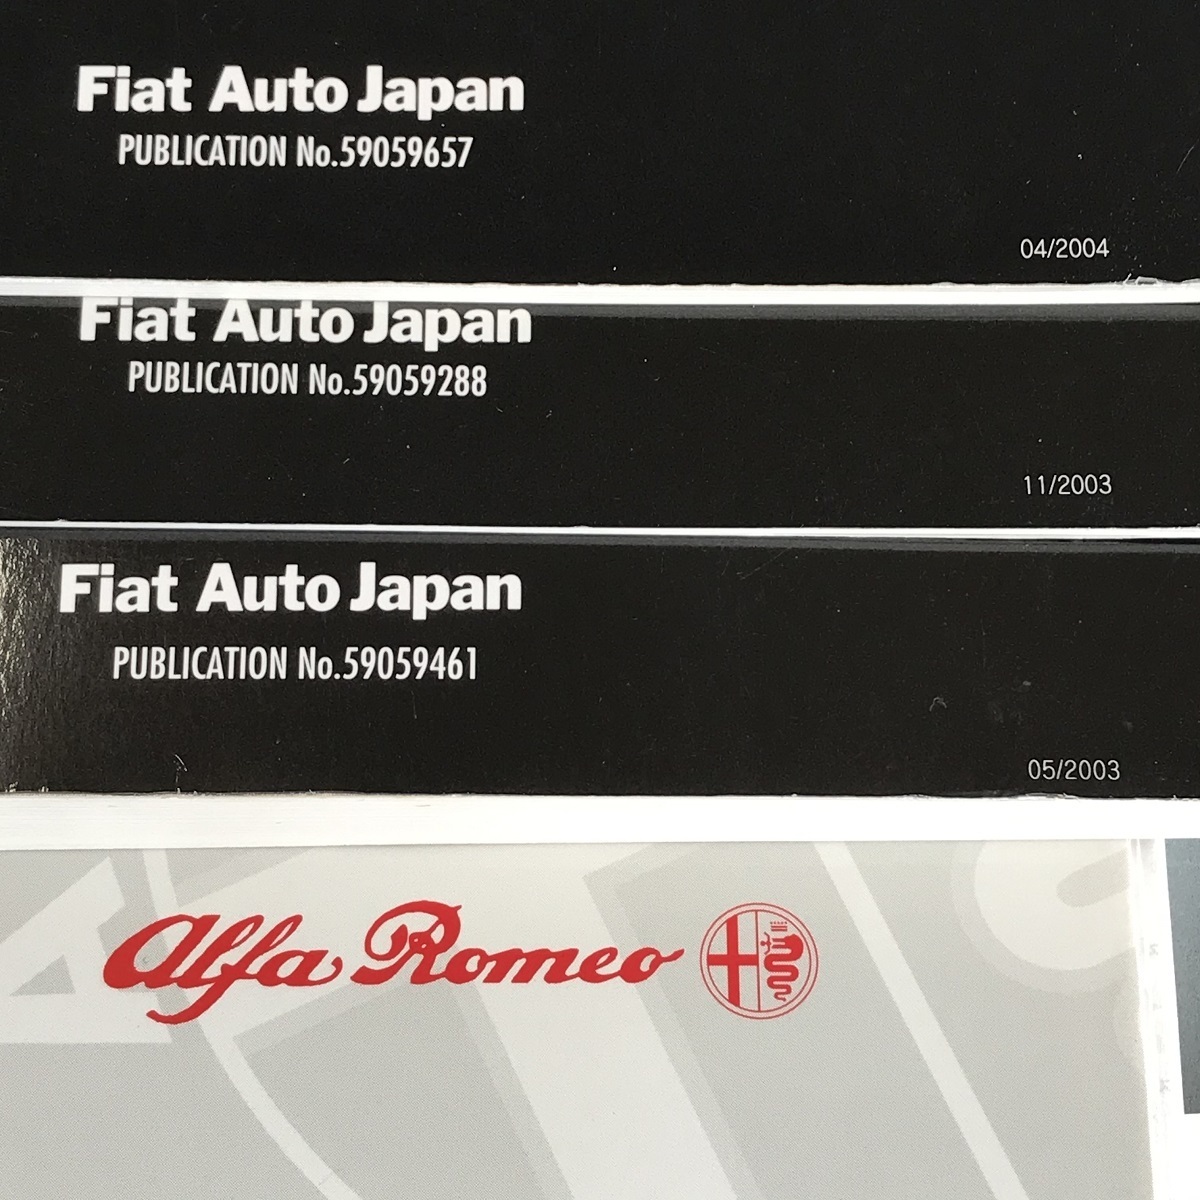 [ Alpha Romeo 147 GTA for / original owner manual complete set case attaching 2003 year 5 month version ][1985-66522]